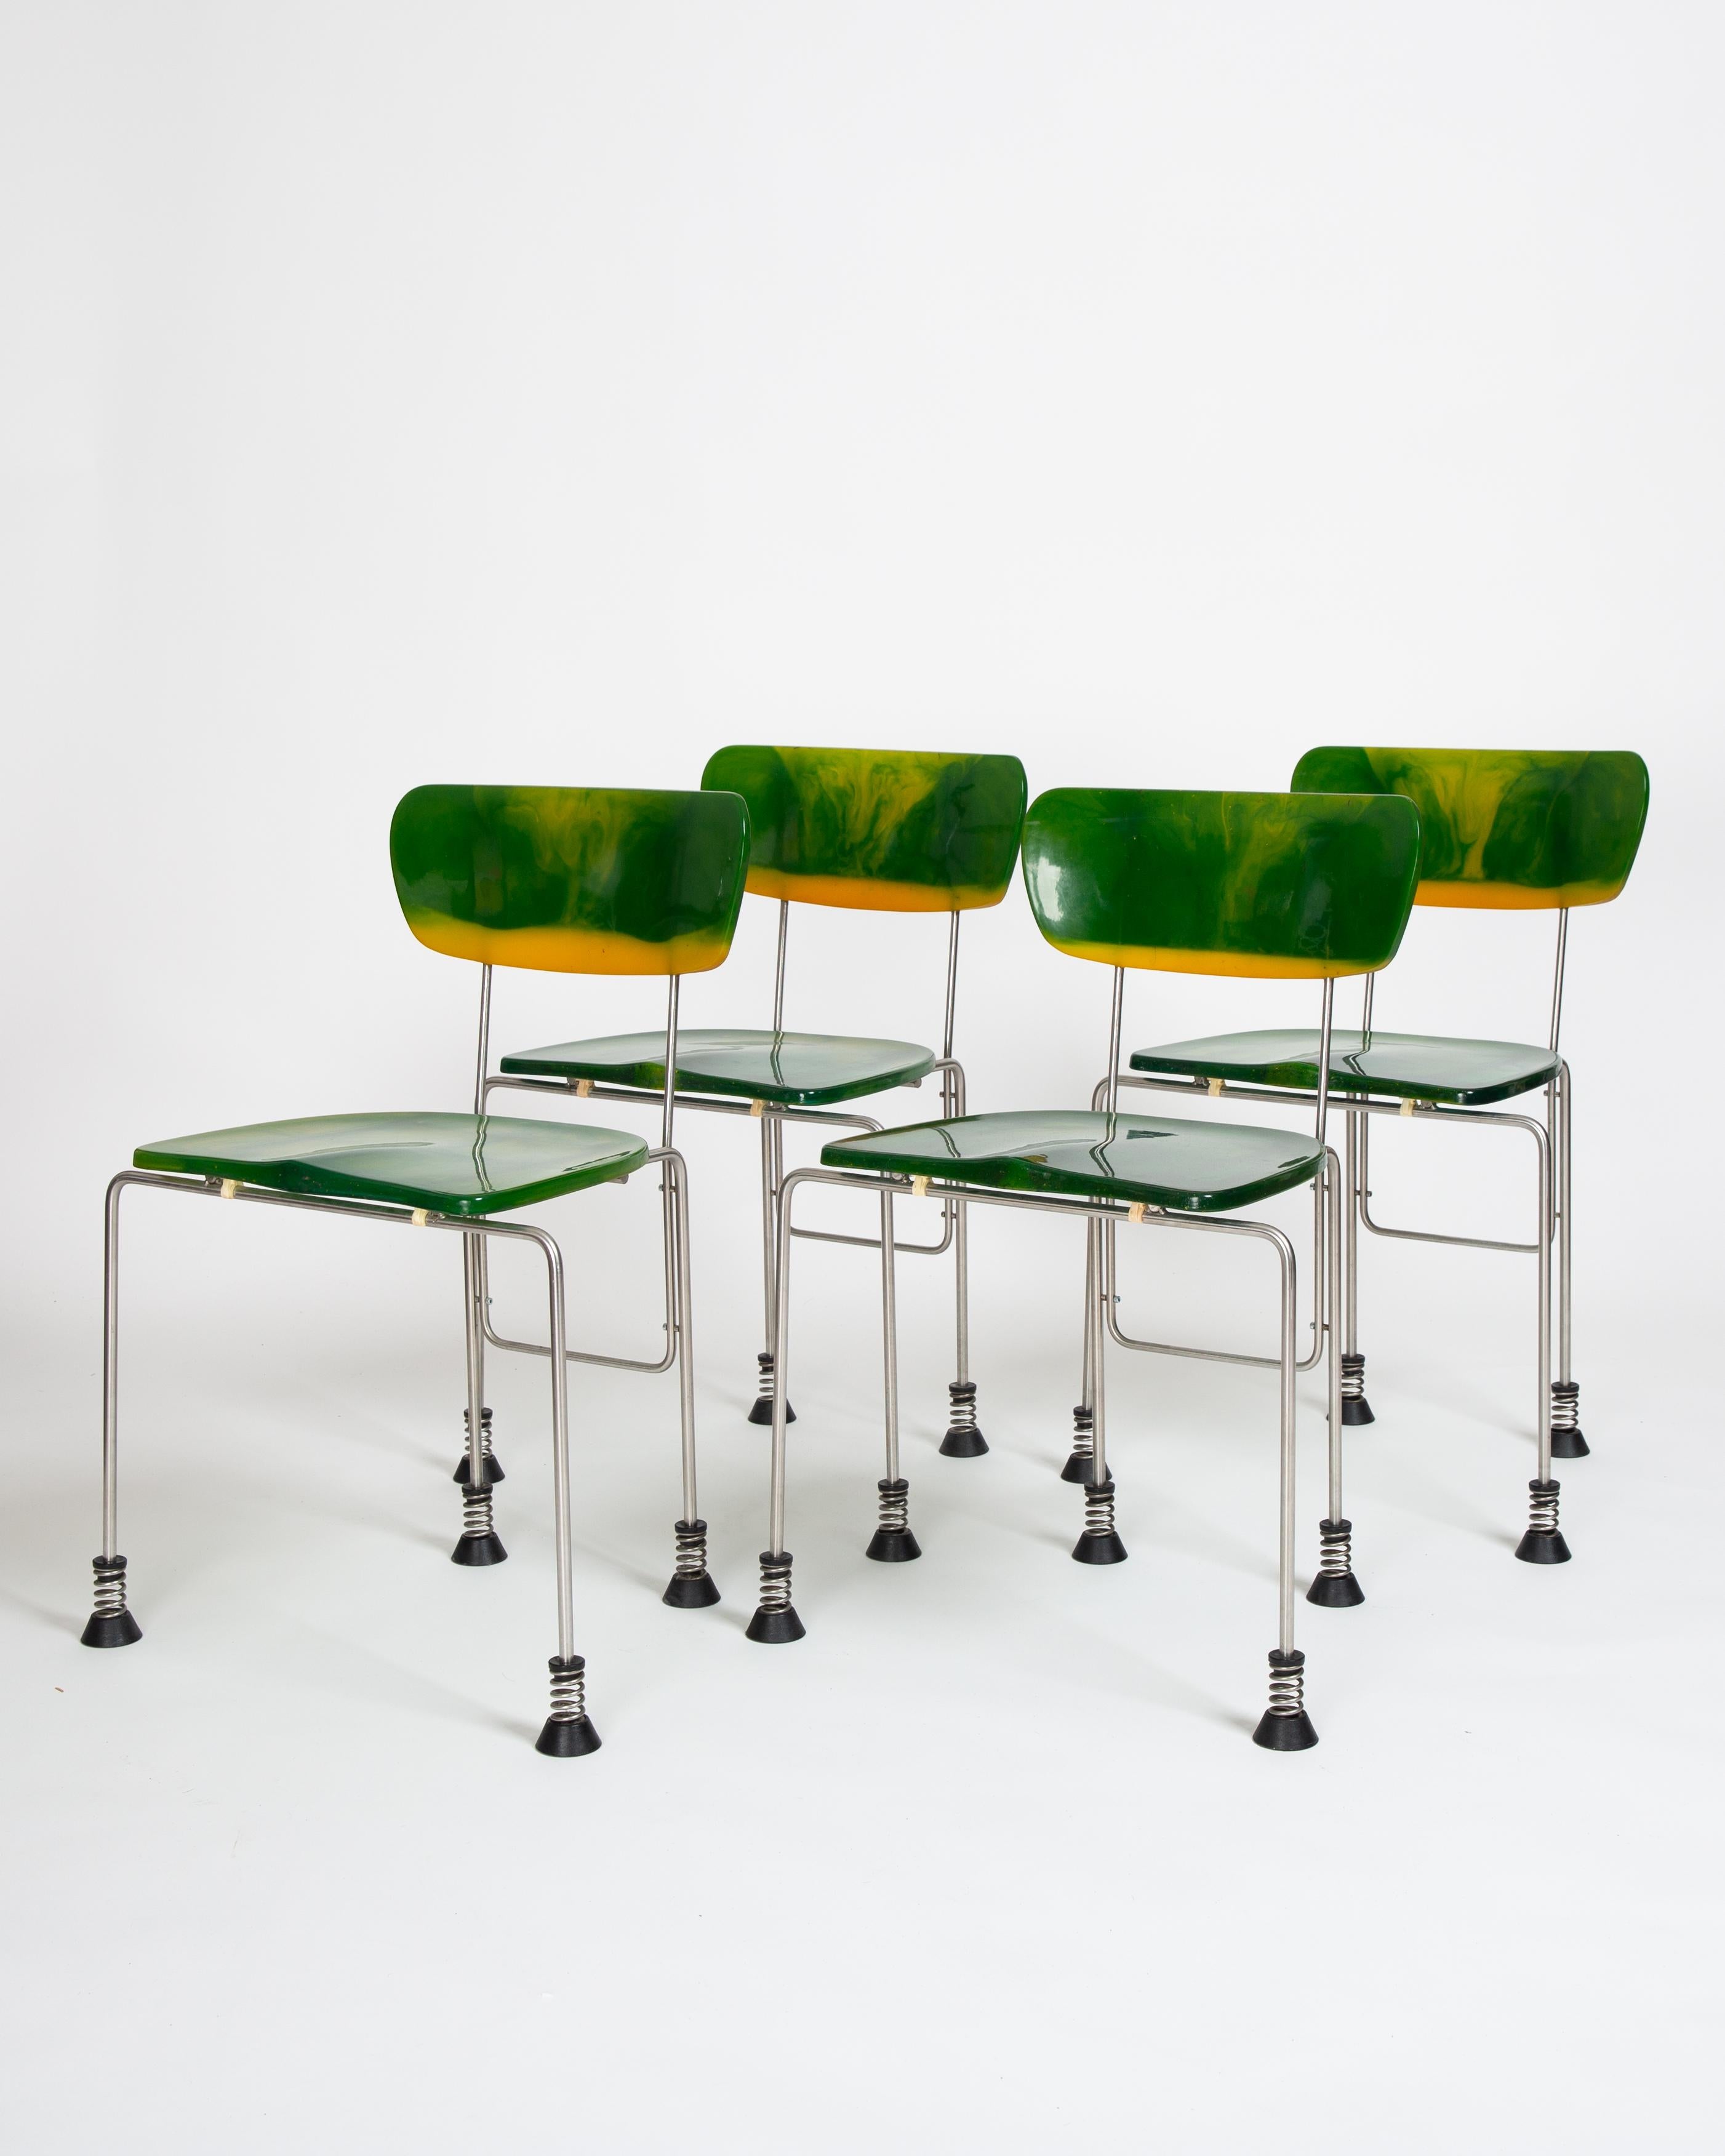 Post-Modern Gaetano Pesce Broadway Chairs 543 Made in Italy by Bernini 1993 Green For Sale